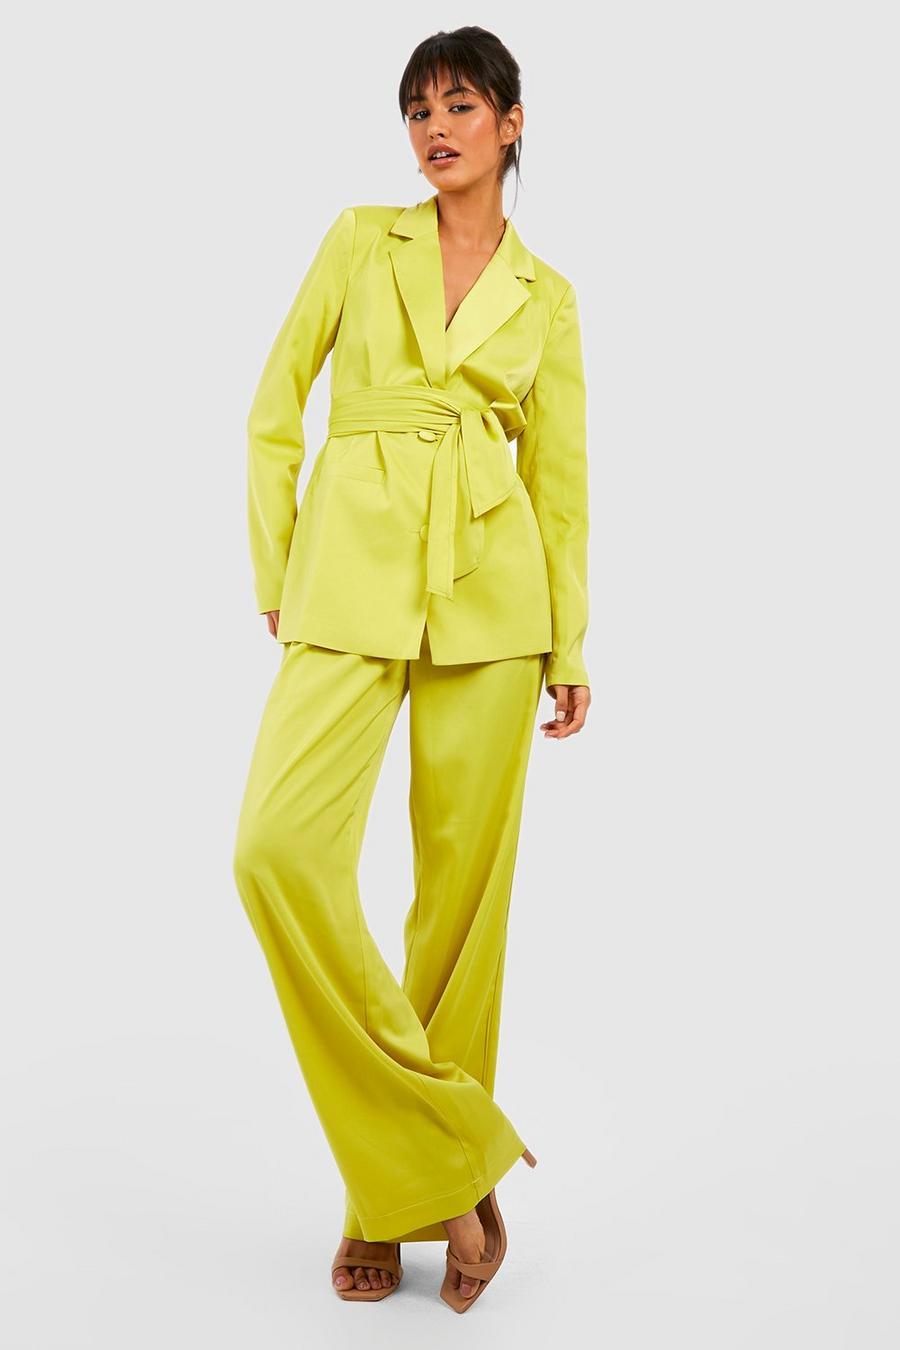 Chartreuse yellow Satin Pleat Front Straight Leg Trousers image number 1